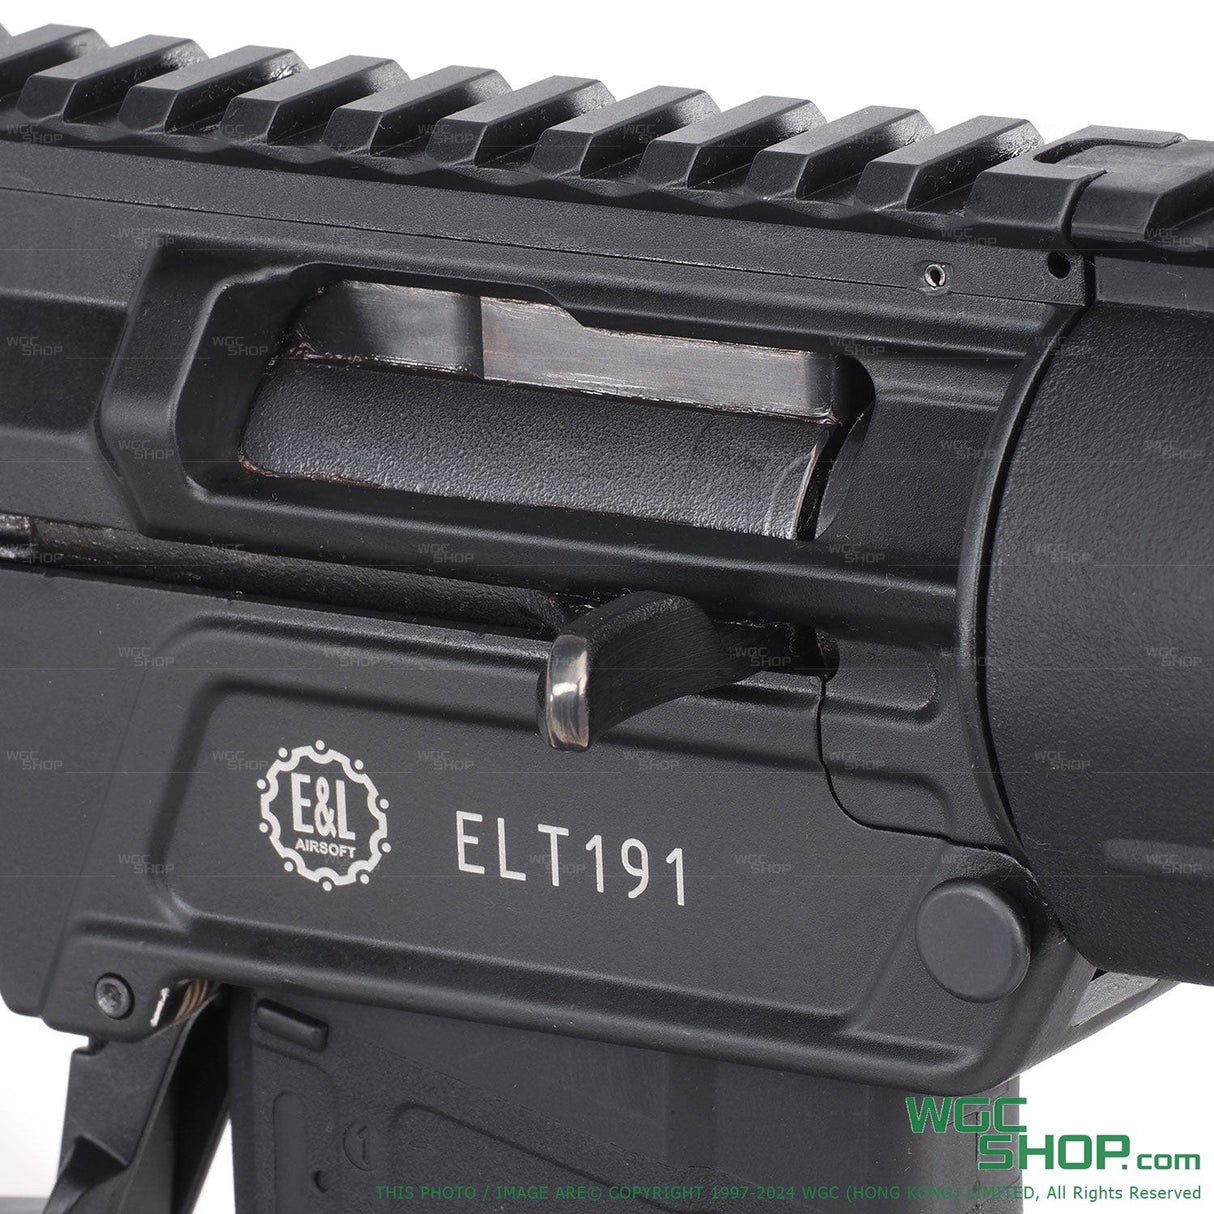 E&L T191 DPS HPA / CO2 GBB Airsoft